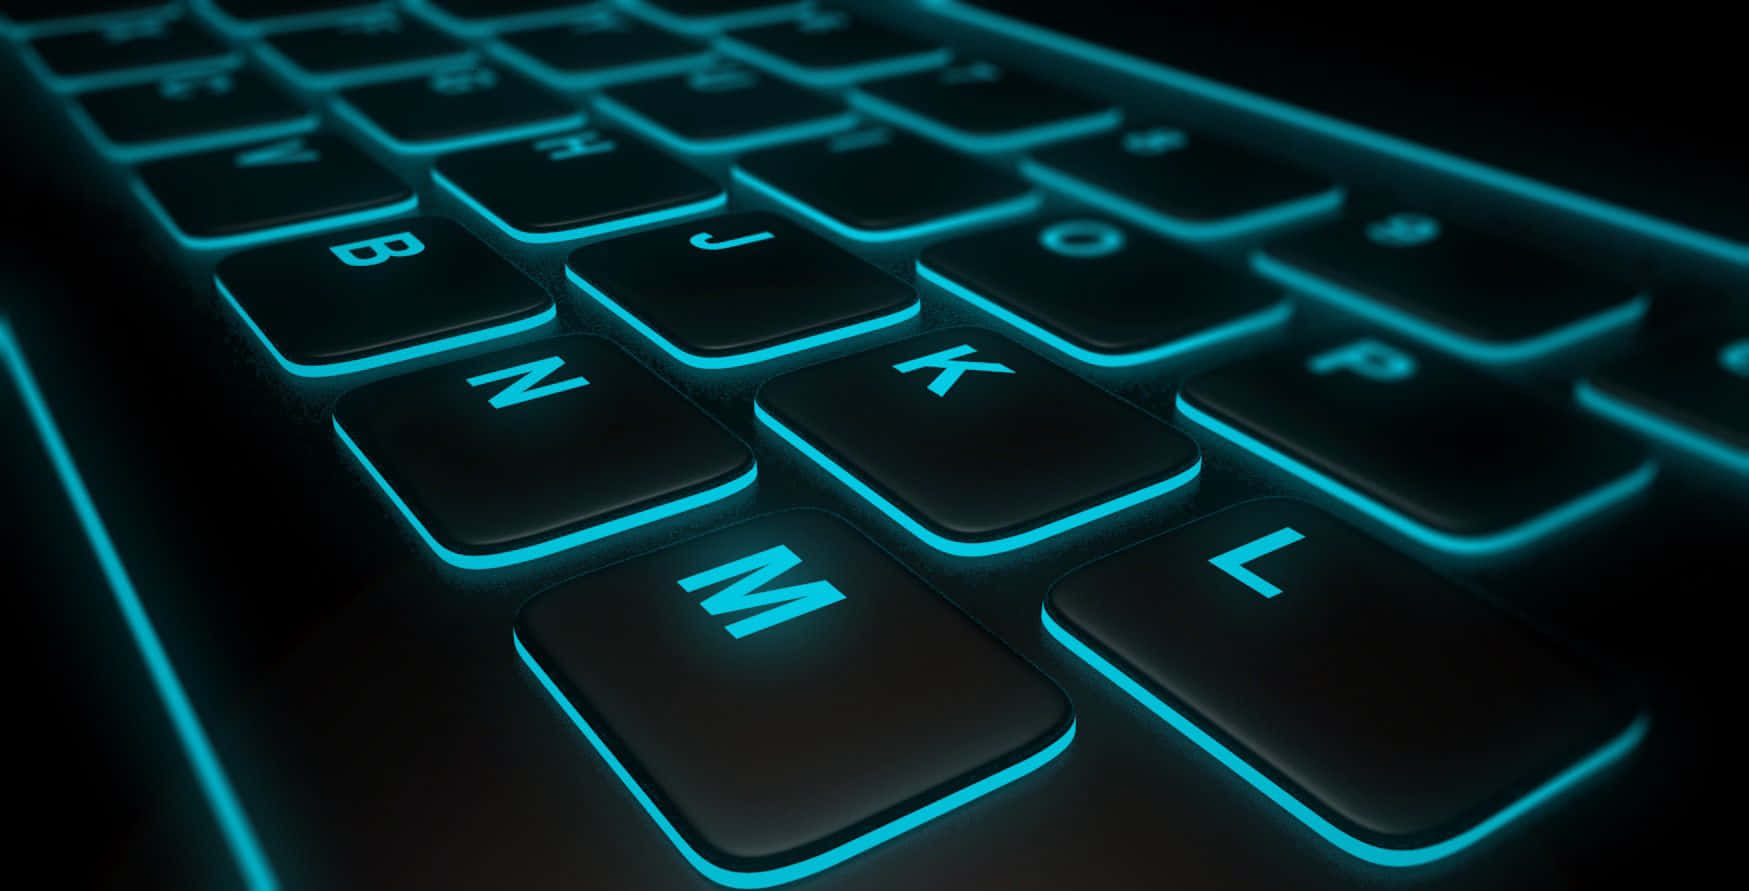 Light Up Your Gaming with a Customizable Keyboard Wallpaper